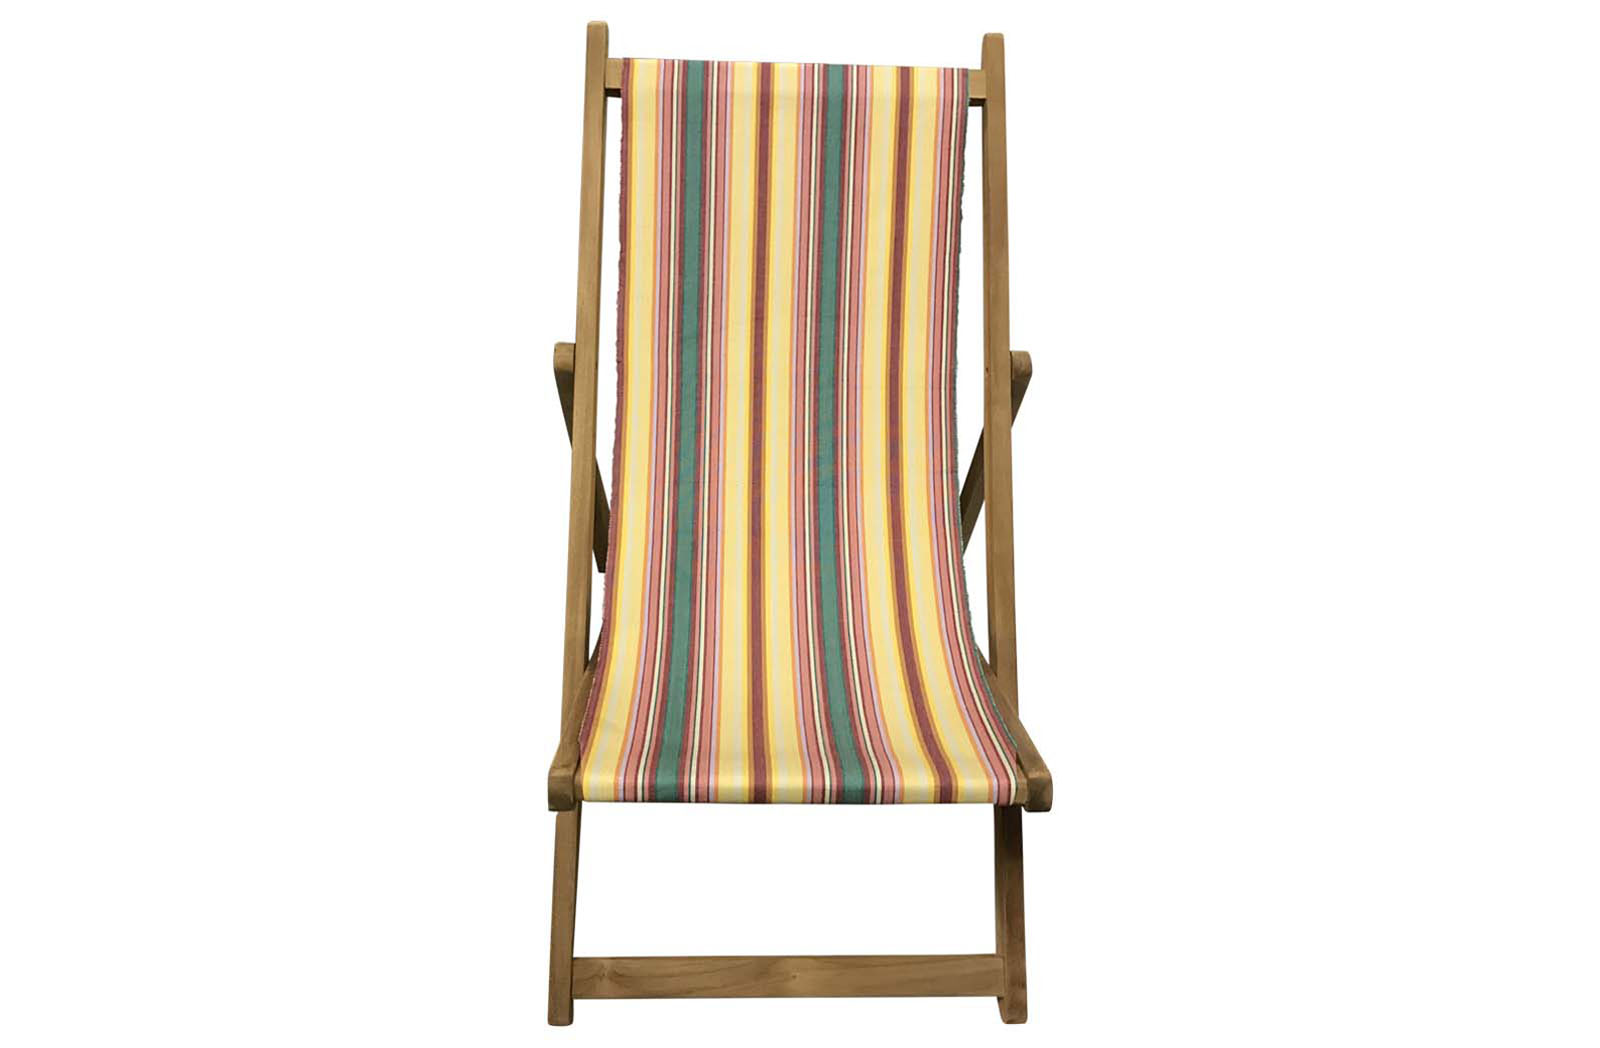 yellow, pink, green - Deckchairs | Buy Folding Wooden Deck Chairs